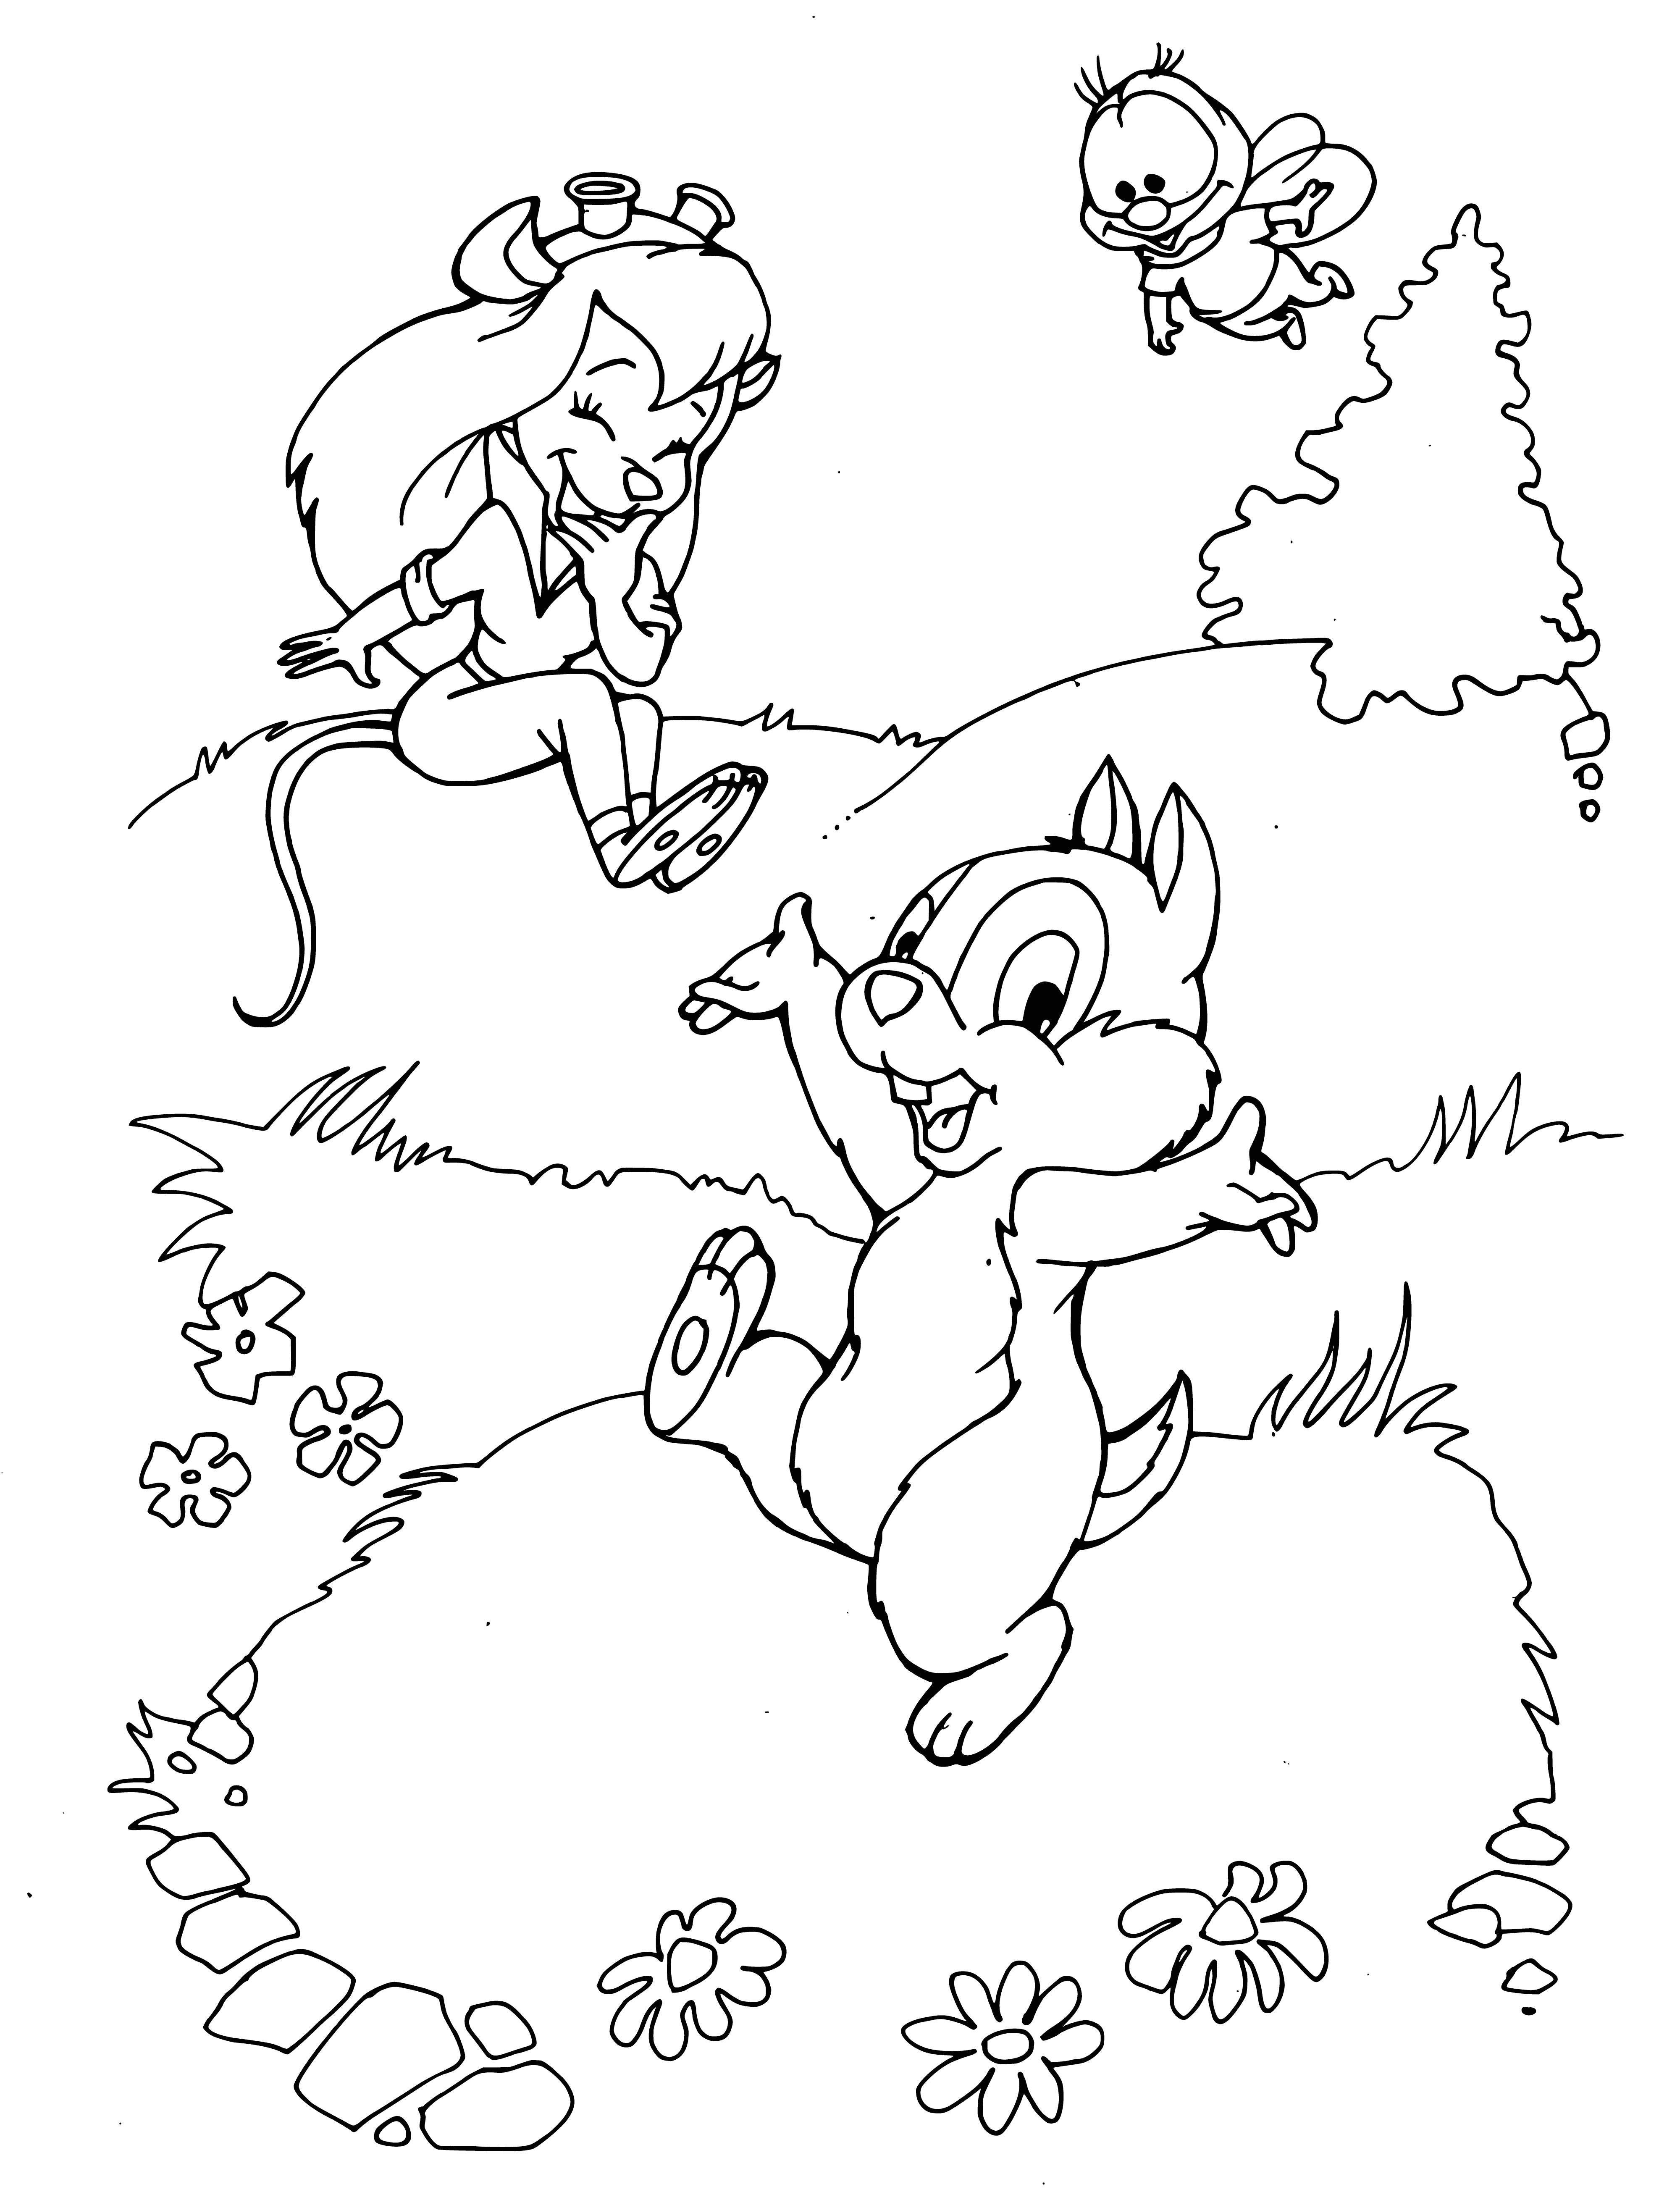 Dale, Vzhik and Gaechka coloring page